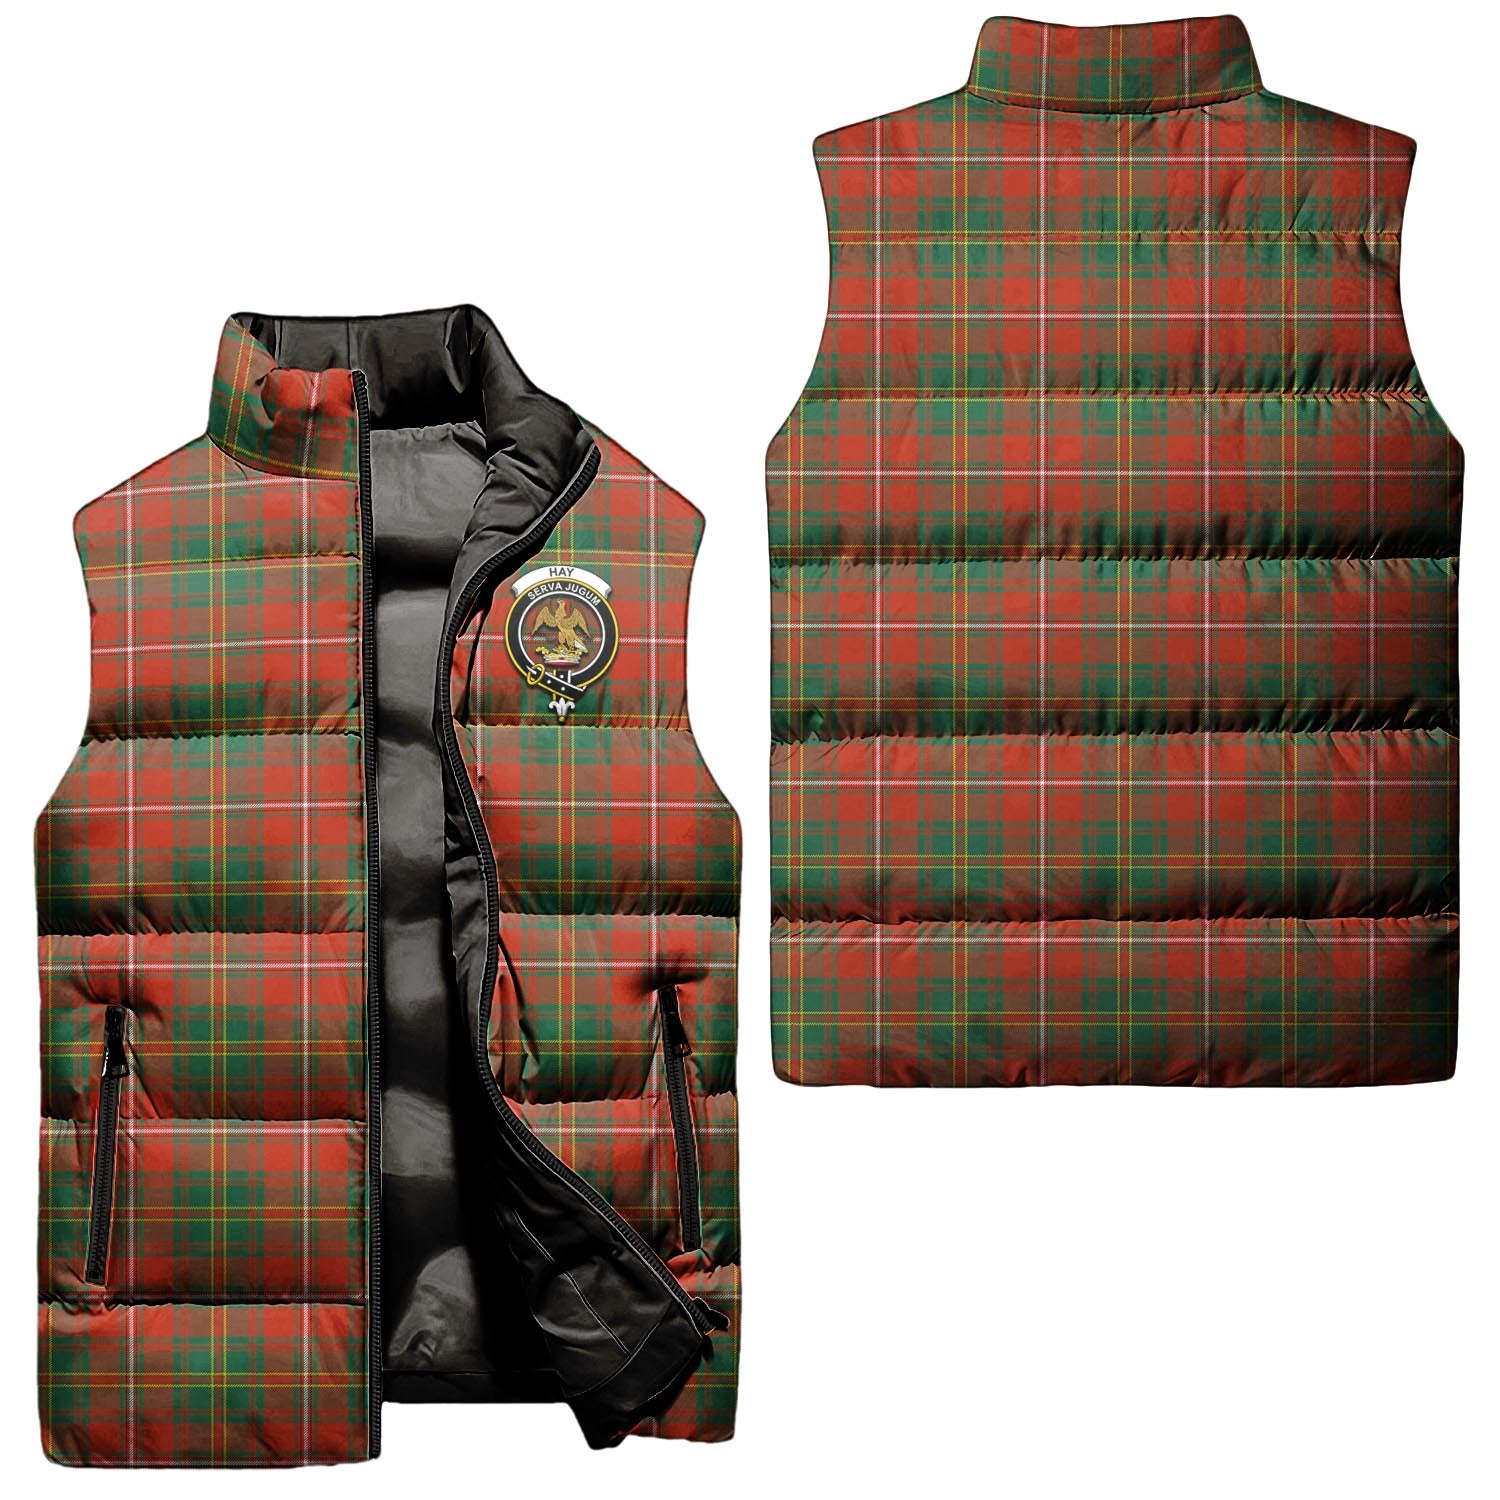 hay-ancient-clan-puffer-vest-family-crest-plaid-sleeveless-down-jacket